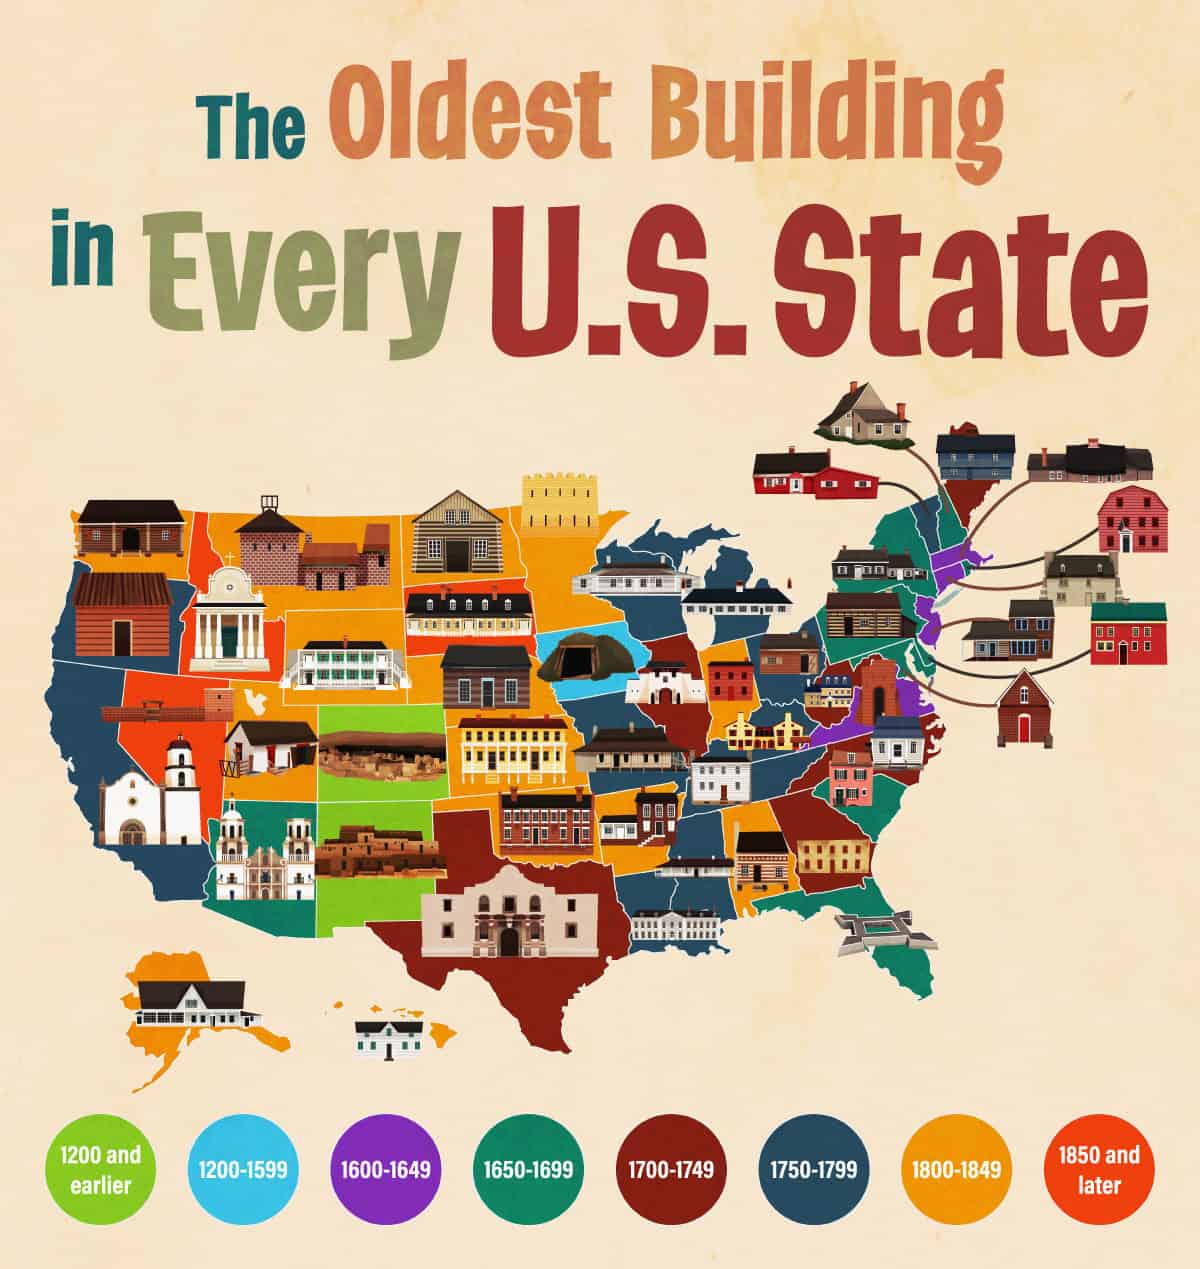 The Oldest Building in Every U.S. State